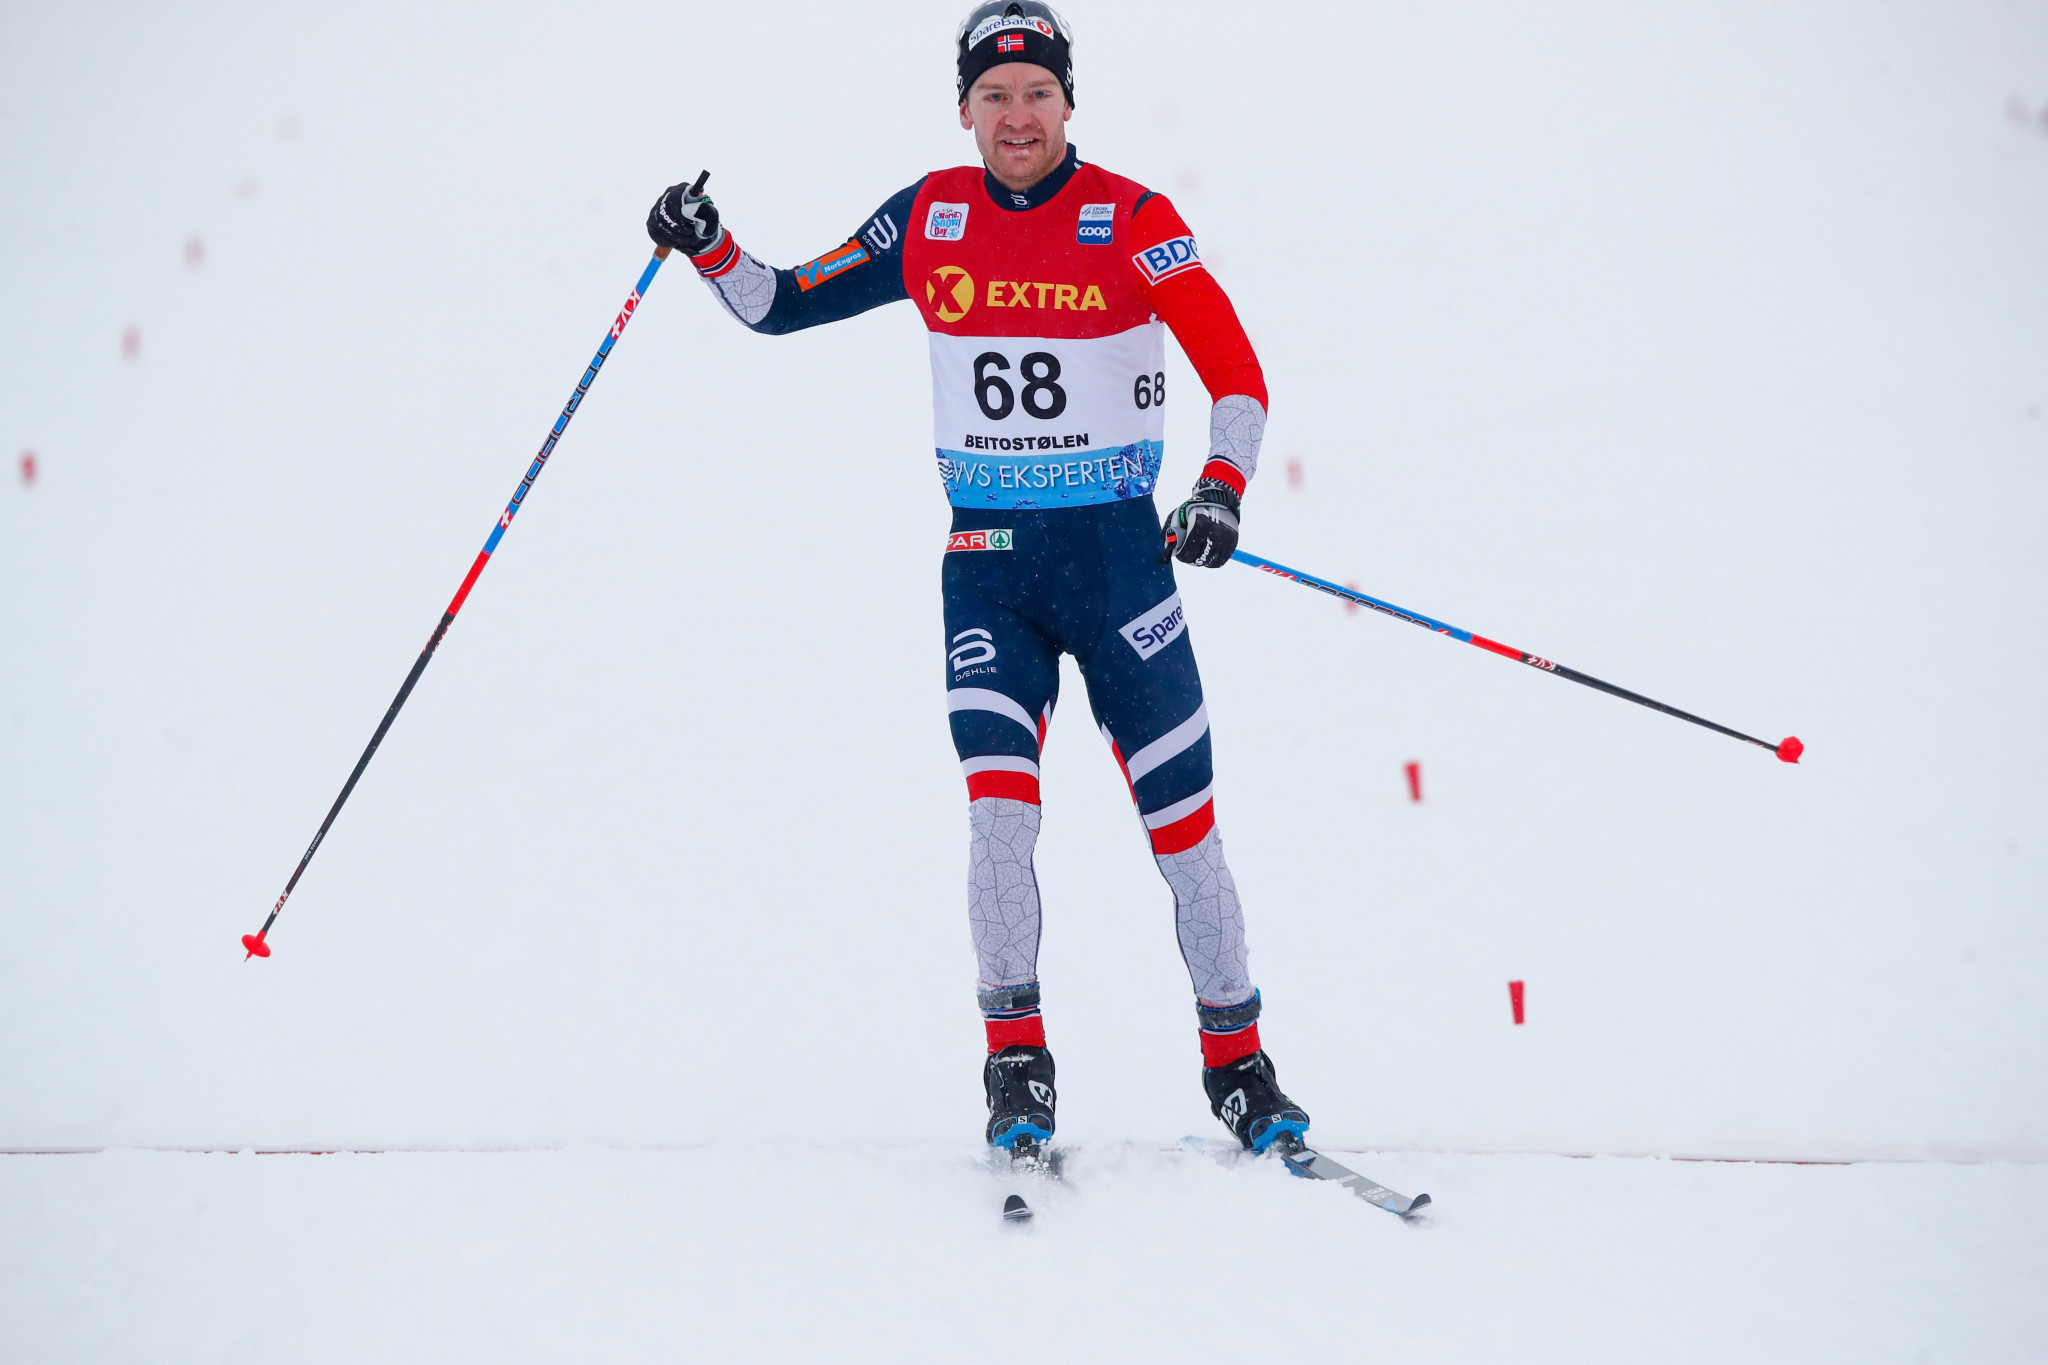 Norway's Sjur Røthe won his 20th World Cup podium with his win in Sweden ©Getty Images